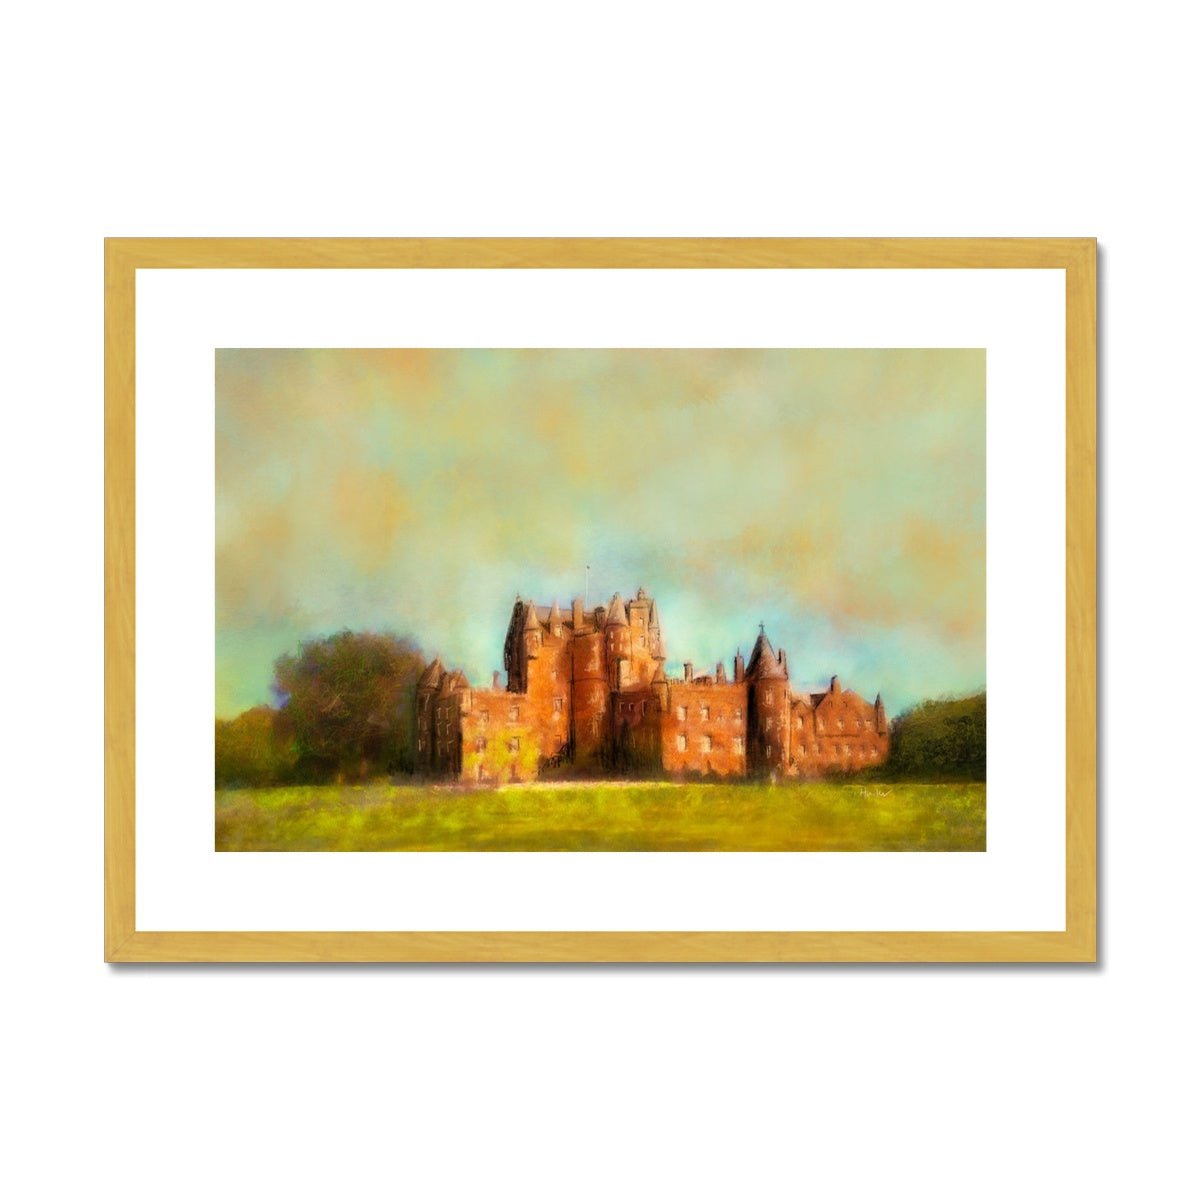 Glamis Castle Painting | Antique Framed & Mounted Prints From Scotland-Antique Framed & Mounted Prints-Historic & Iconic Scotland Art Gallery-A2 Landscape-Gold Frame-Paintings, Prints, Homeware, Art Gifts From Scotland By Scottish Artist Kevin Hunter